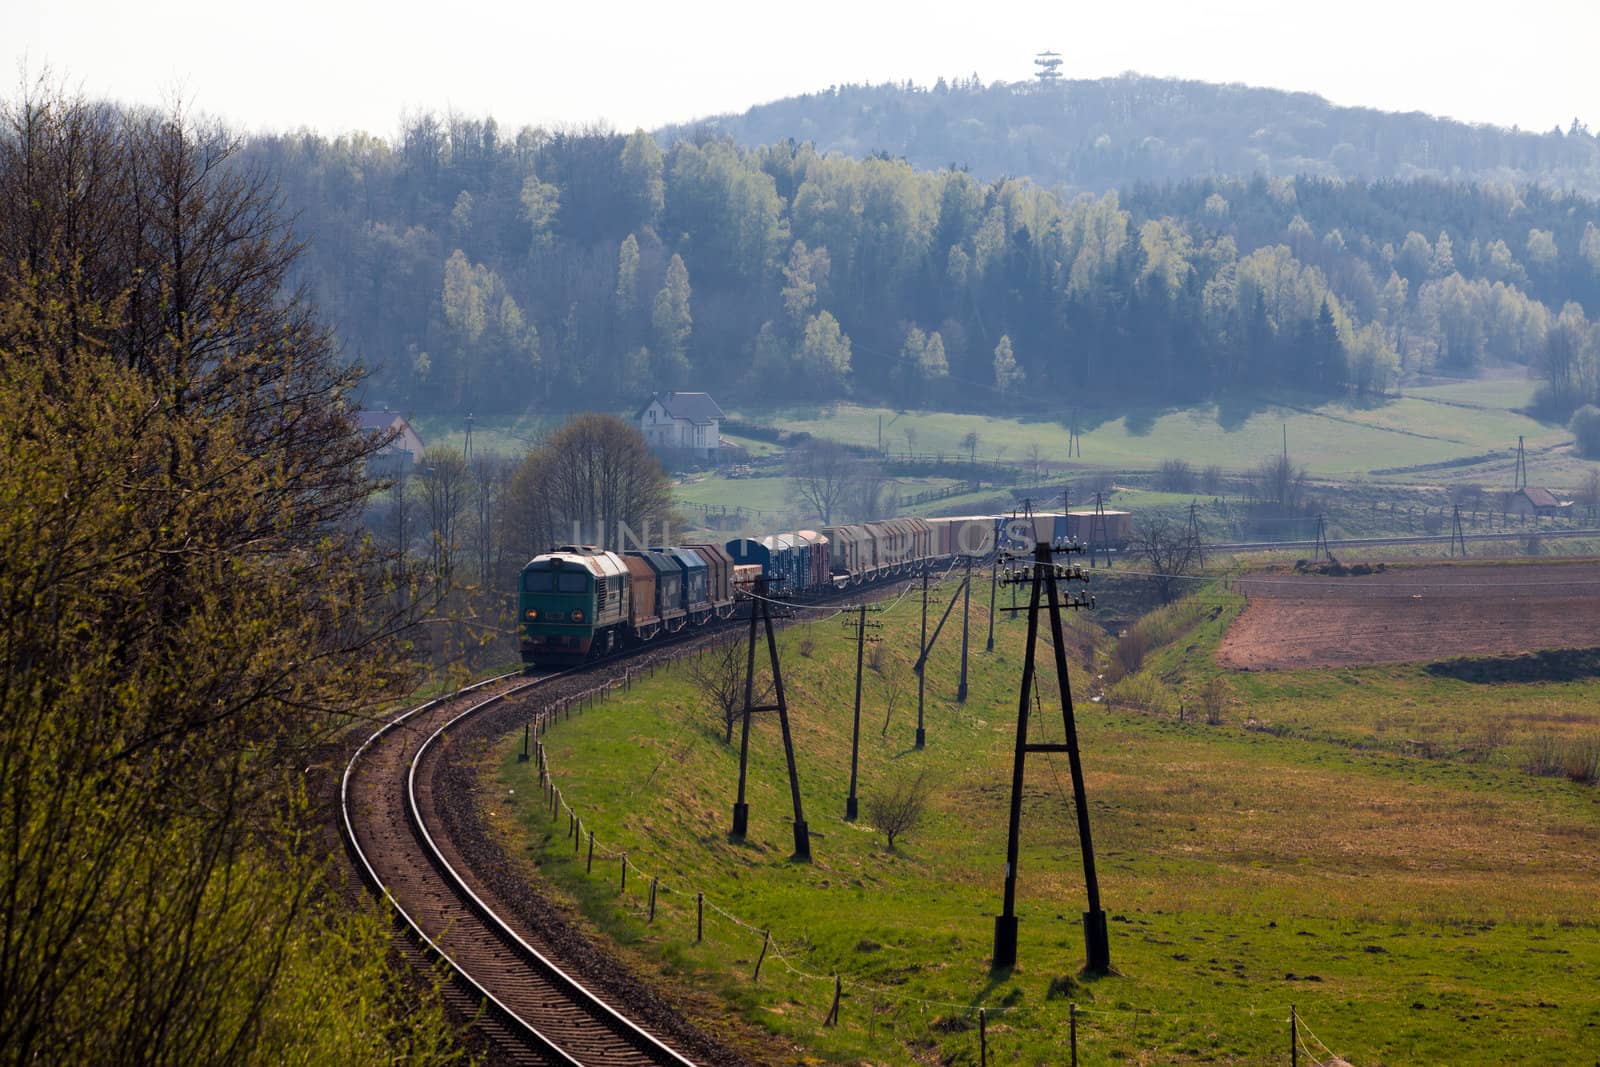 Freight train passing the hilly landscape
